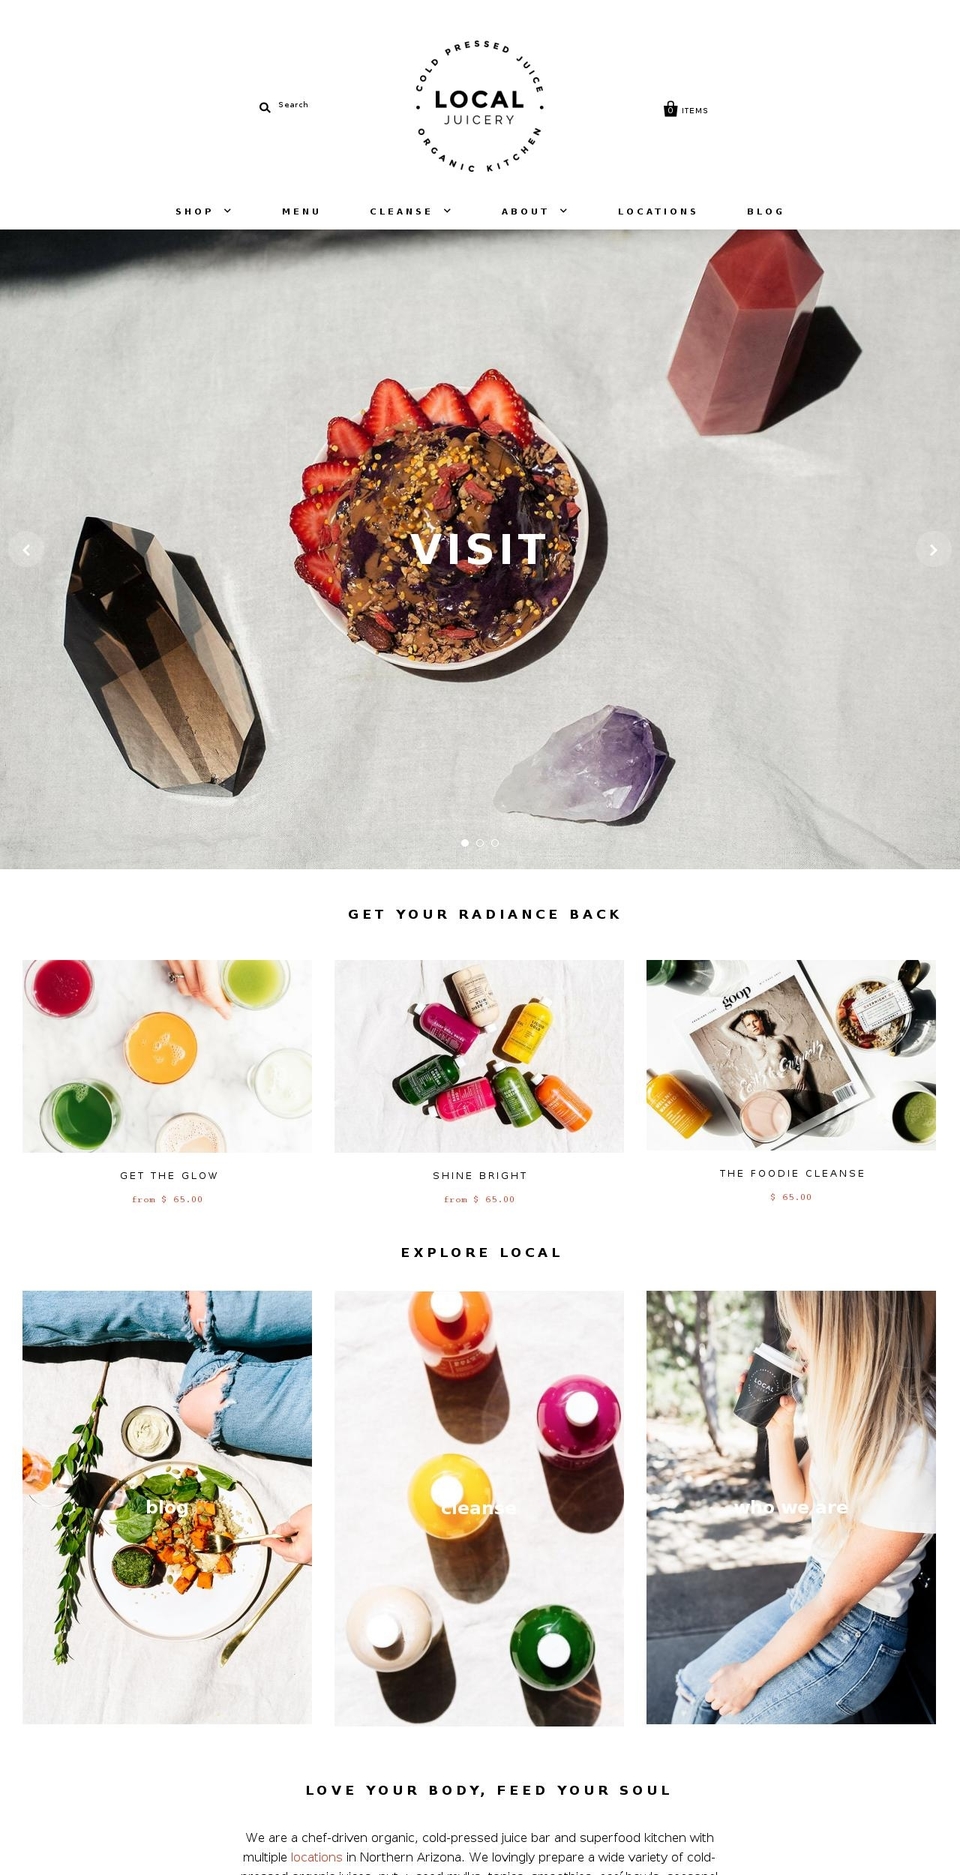 Local Shopify theme site example shoplocaljuicery.com